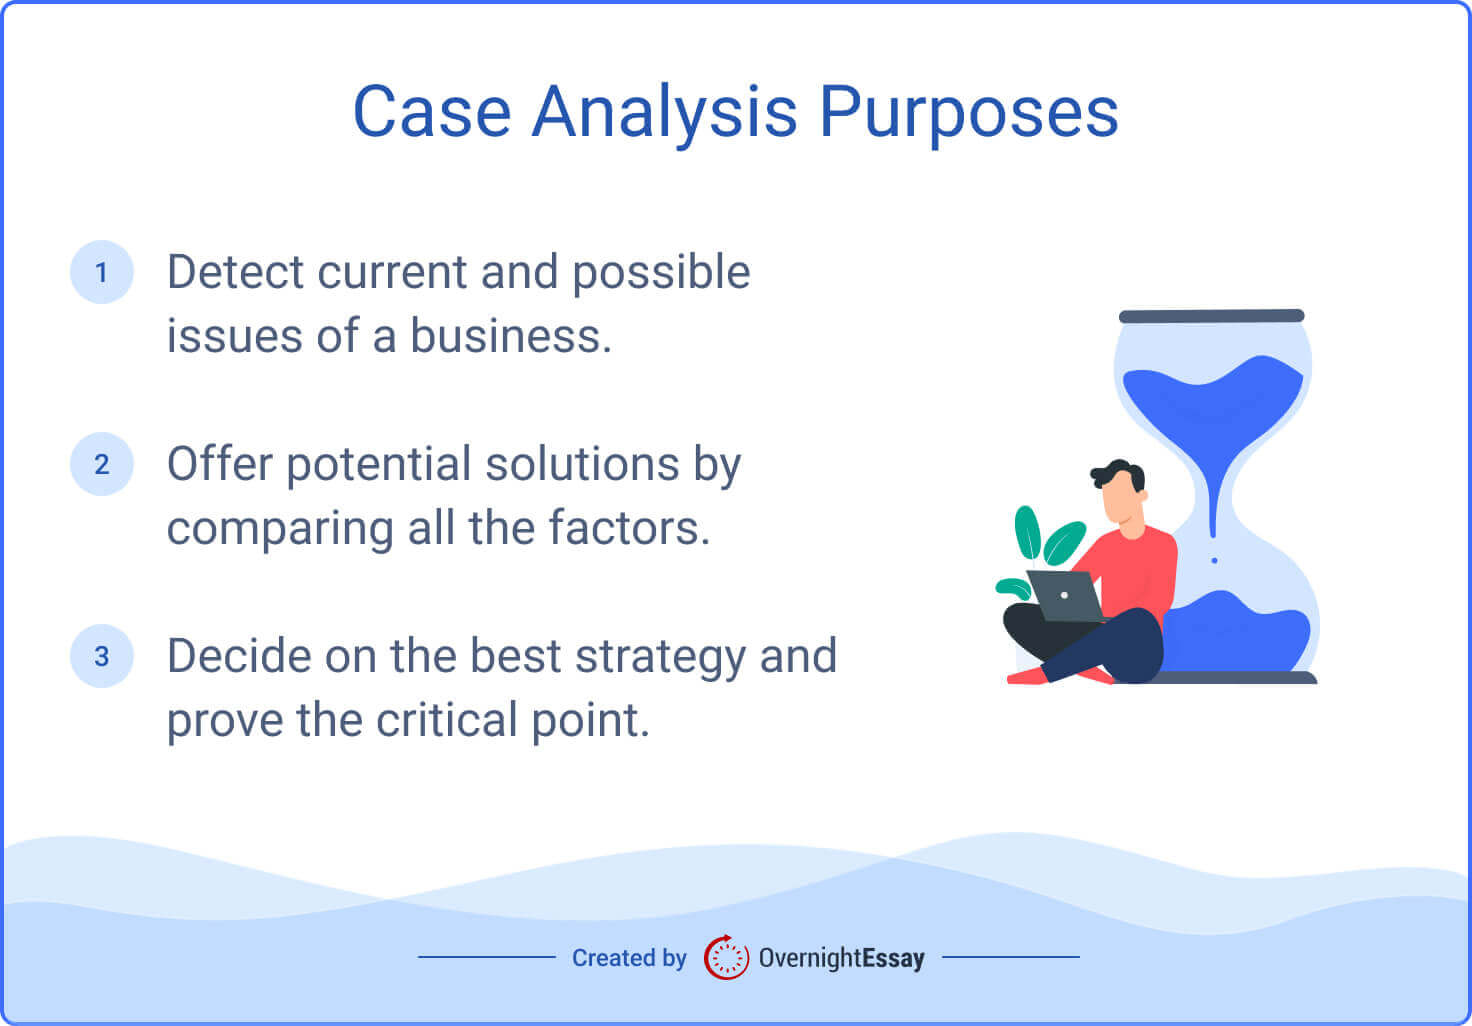 The picture lists three main purposes of a case analysis.